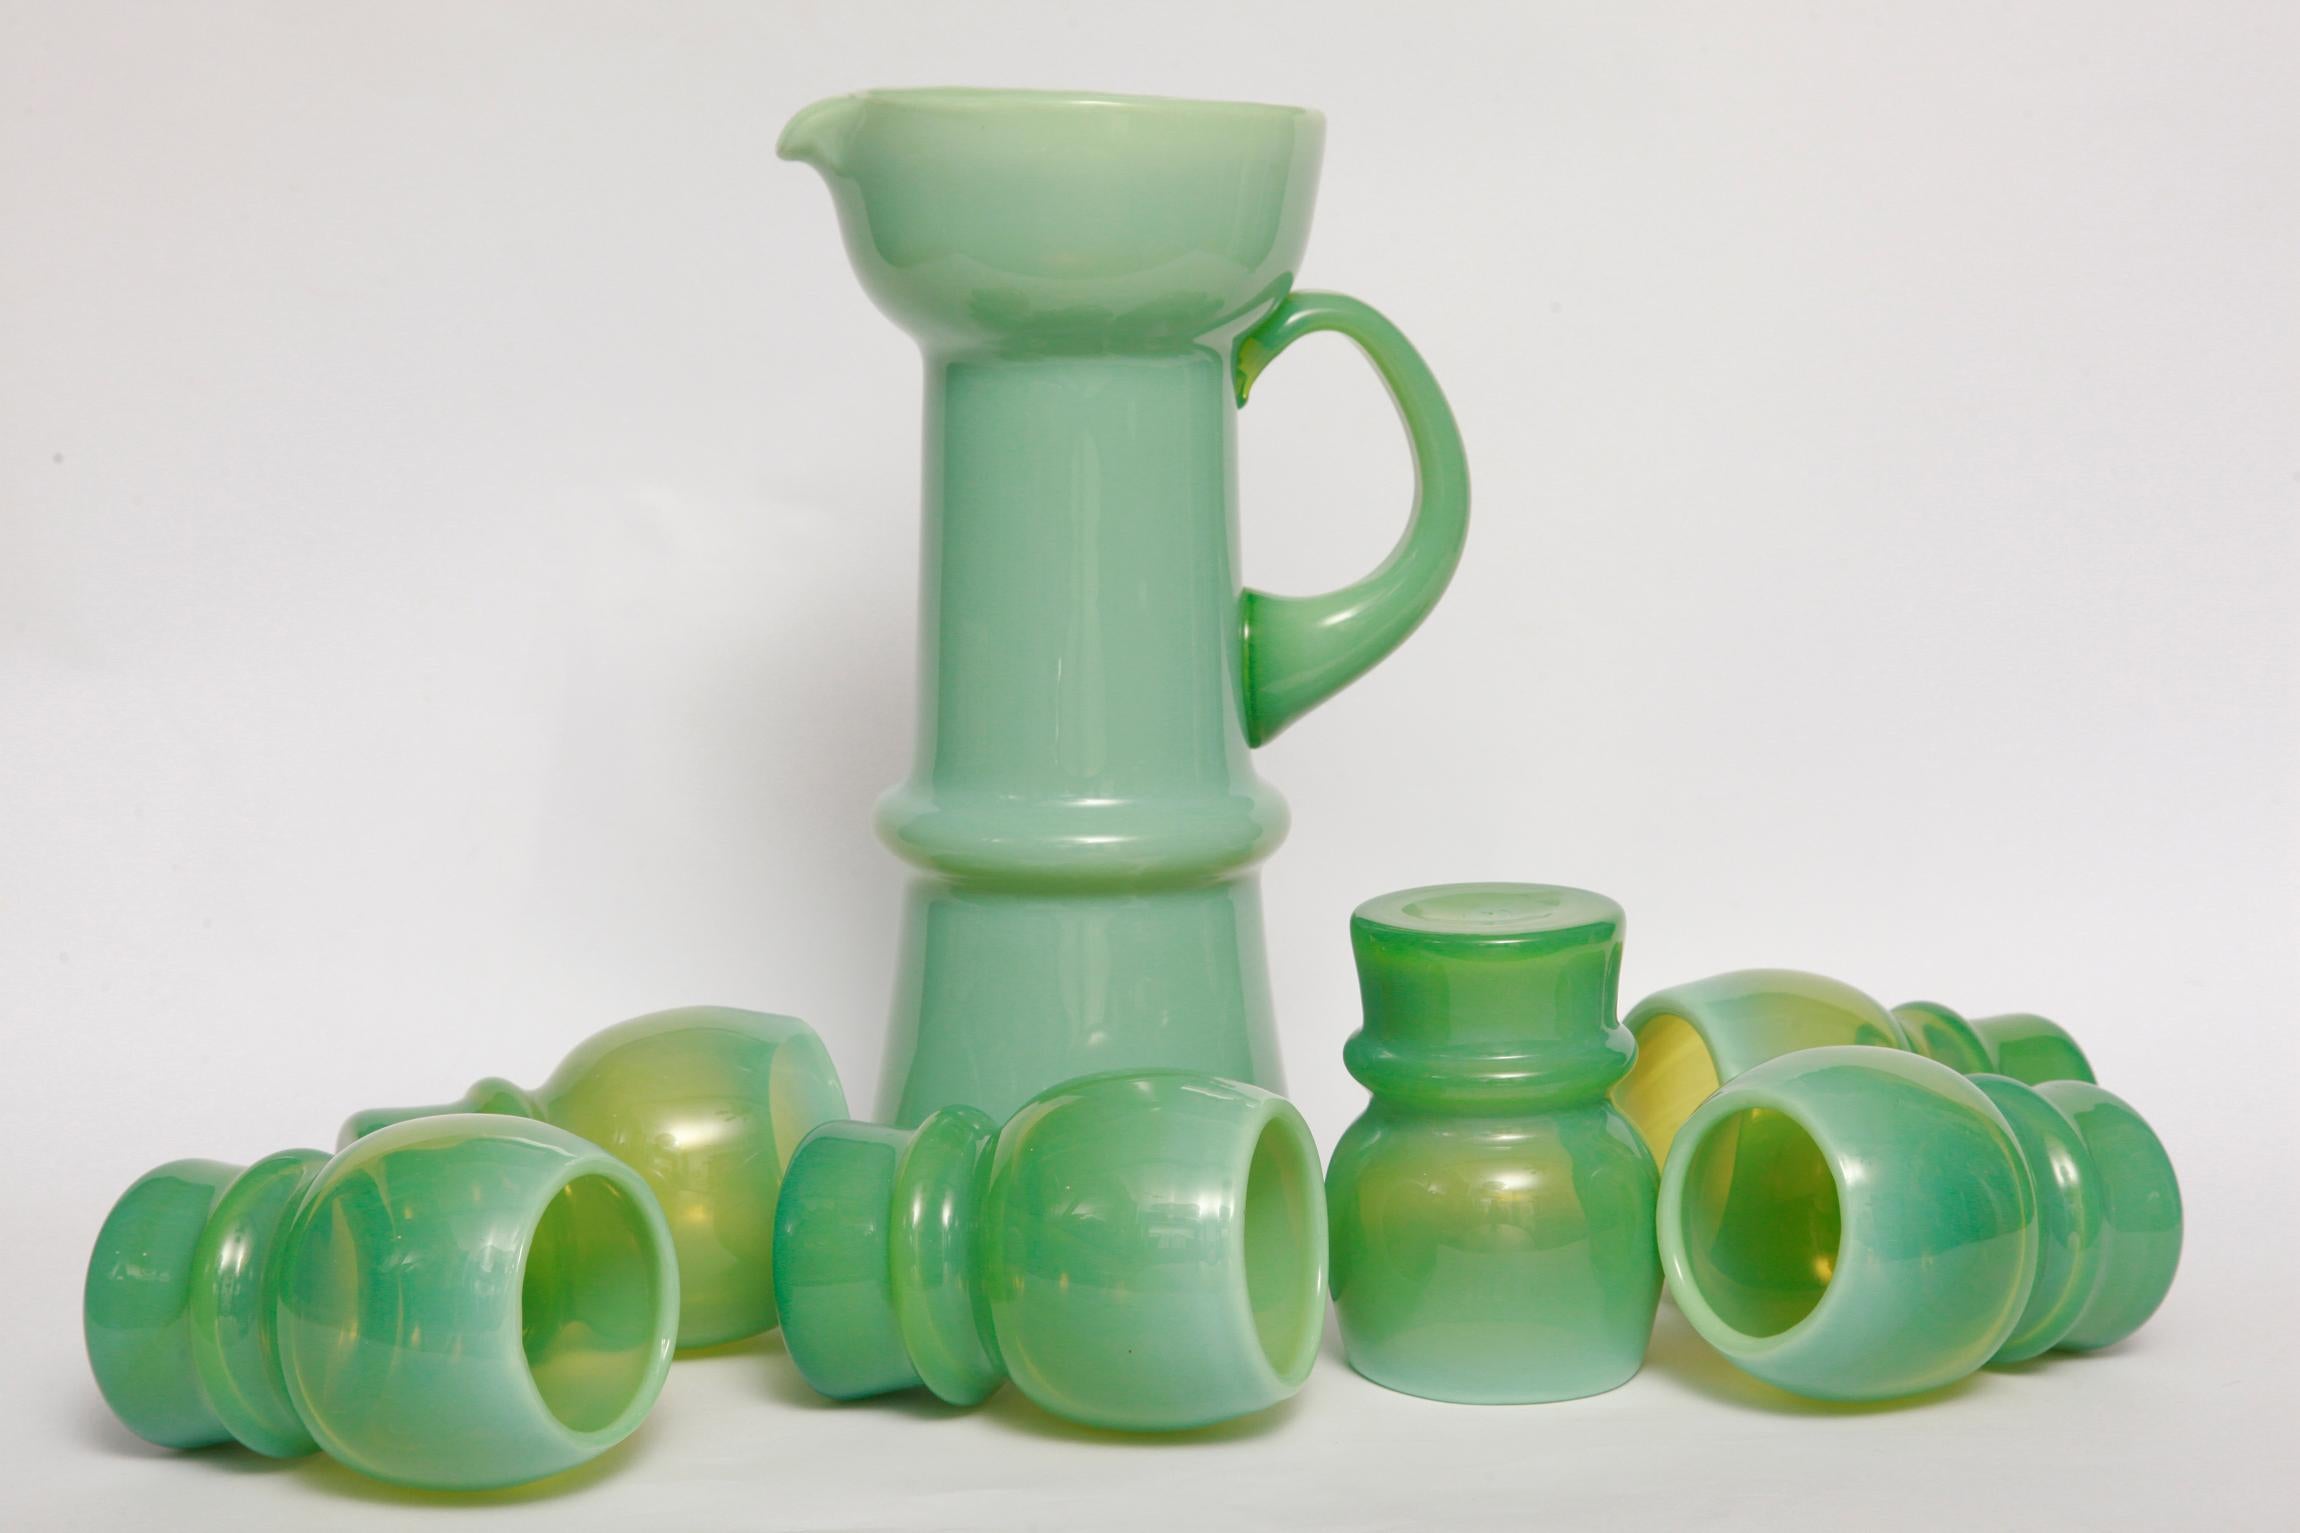 Mid-Century Modern Glass Set Mint-Colored for Juices by Zbigniew Horbowy, Poland, 1960s